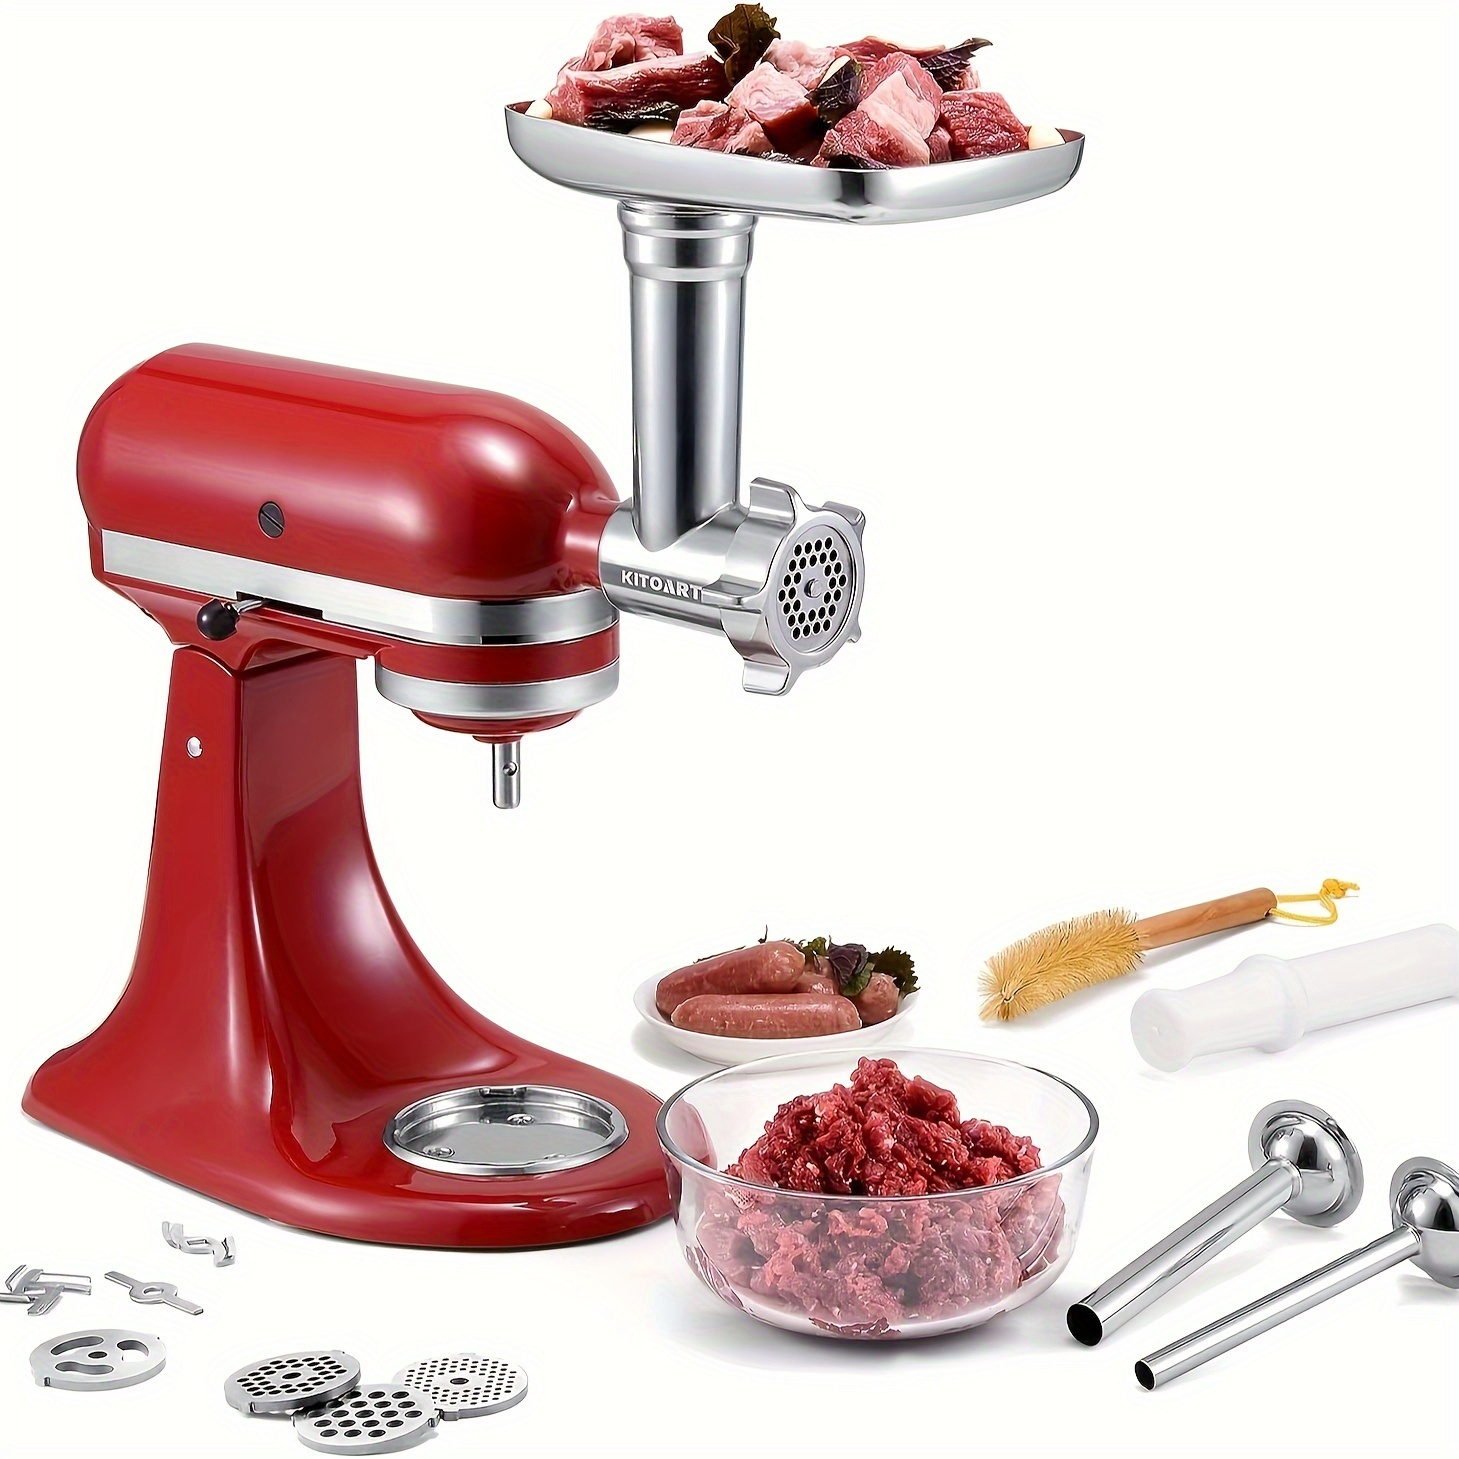 Slicer accessories and meat grinder 2 in 1 for KitchenAid vertical mixer,  accessories for vegetable mixing and meat processing - AliExpress